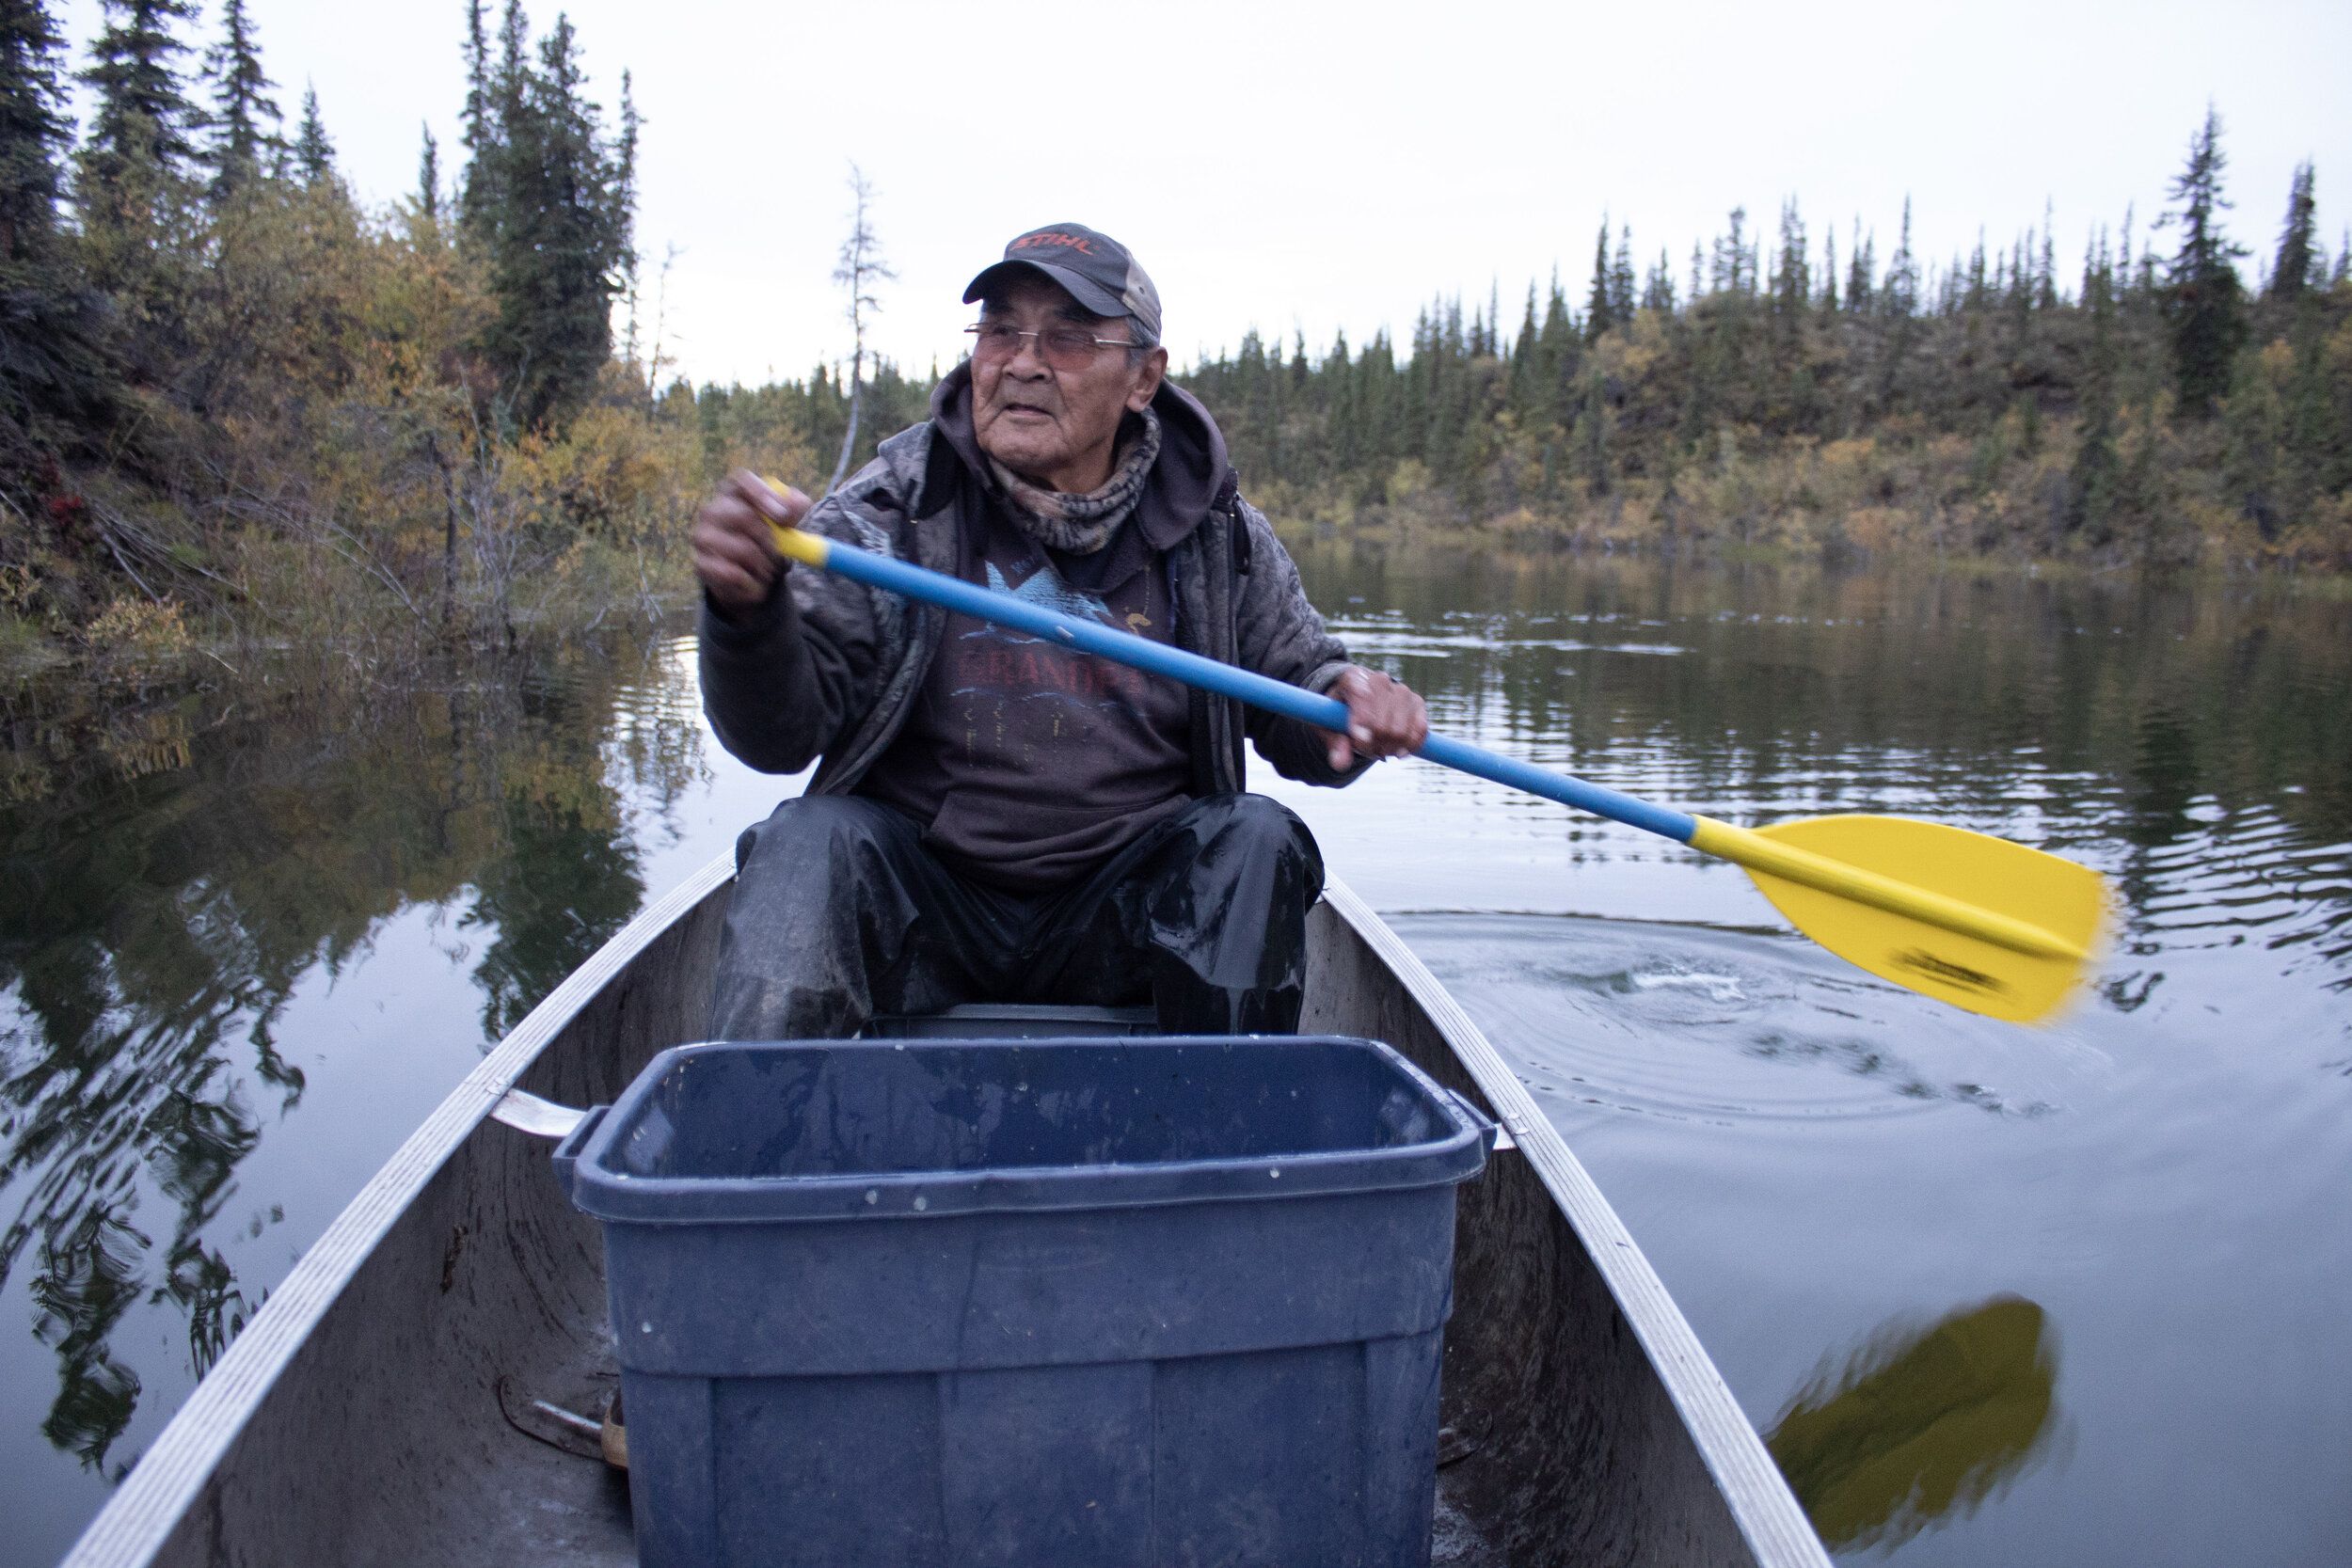 Gideon James rowing out on the creek that runs through Arctic Village. Image by Amy Martin. United States, 2019.